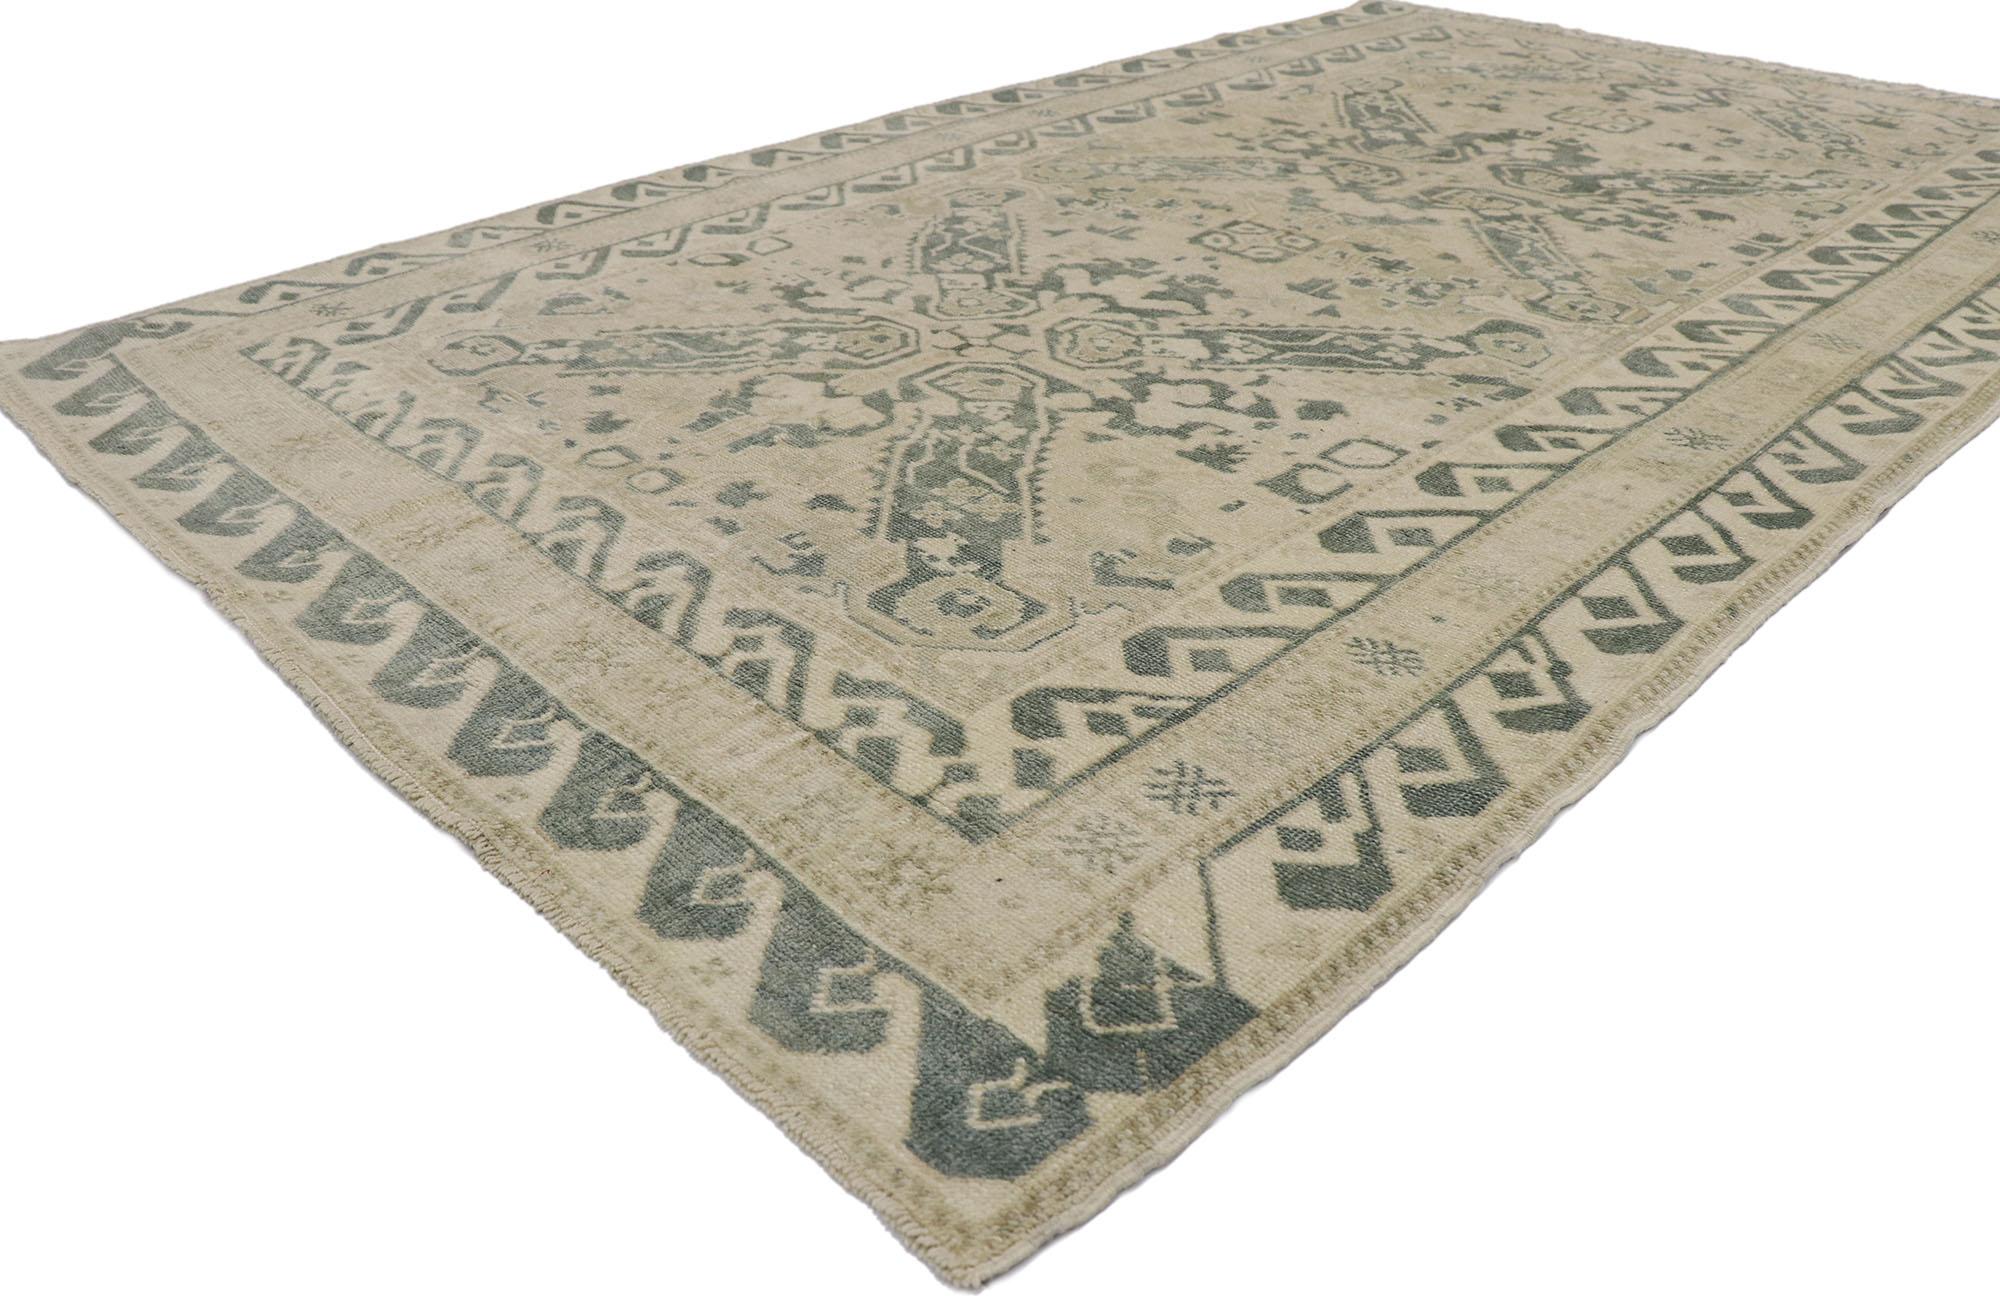 53625 vintage Turkish Oushak rug with Swedish Gustavian style 04'10 x 08'01. Drawing inspiration from Swedish simplicity and Gustavian grace, this hand knotted wool Turkish Oushak rug displays nostalgic charm and inimitable warmth. The abrashed tan